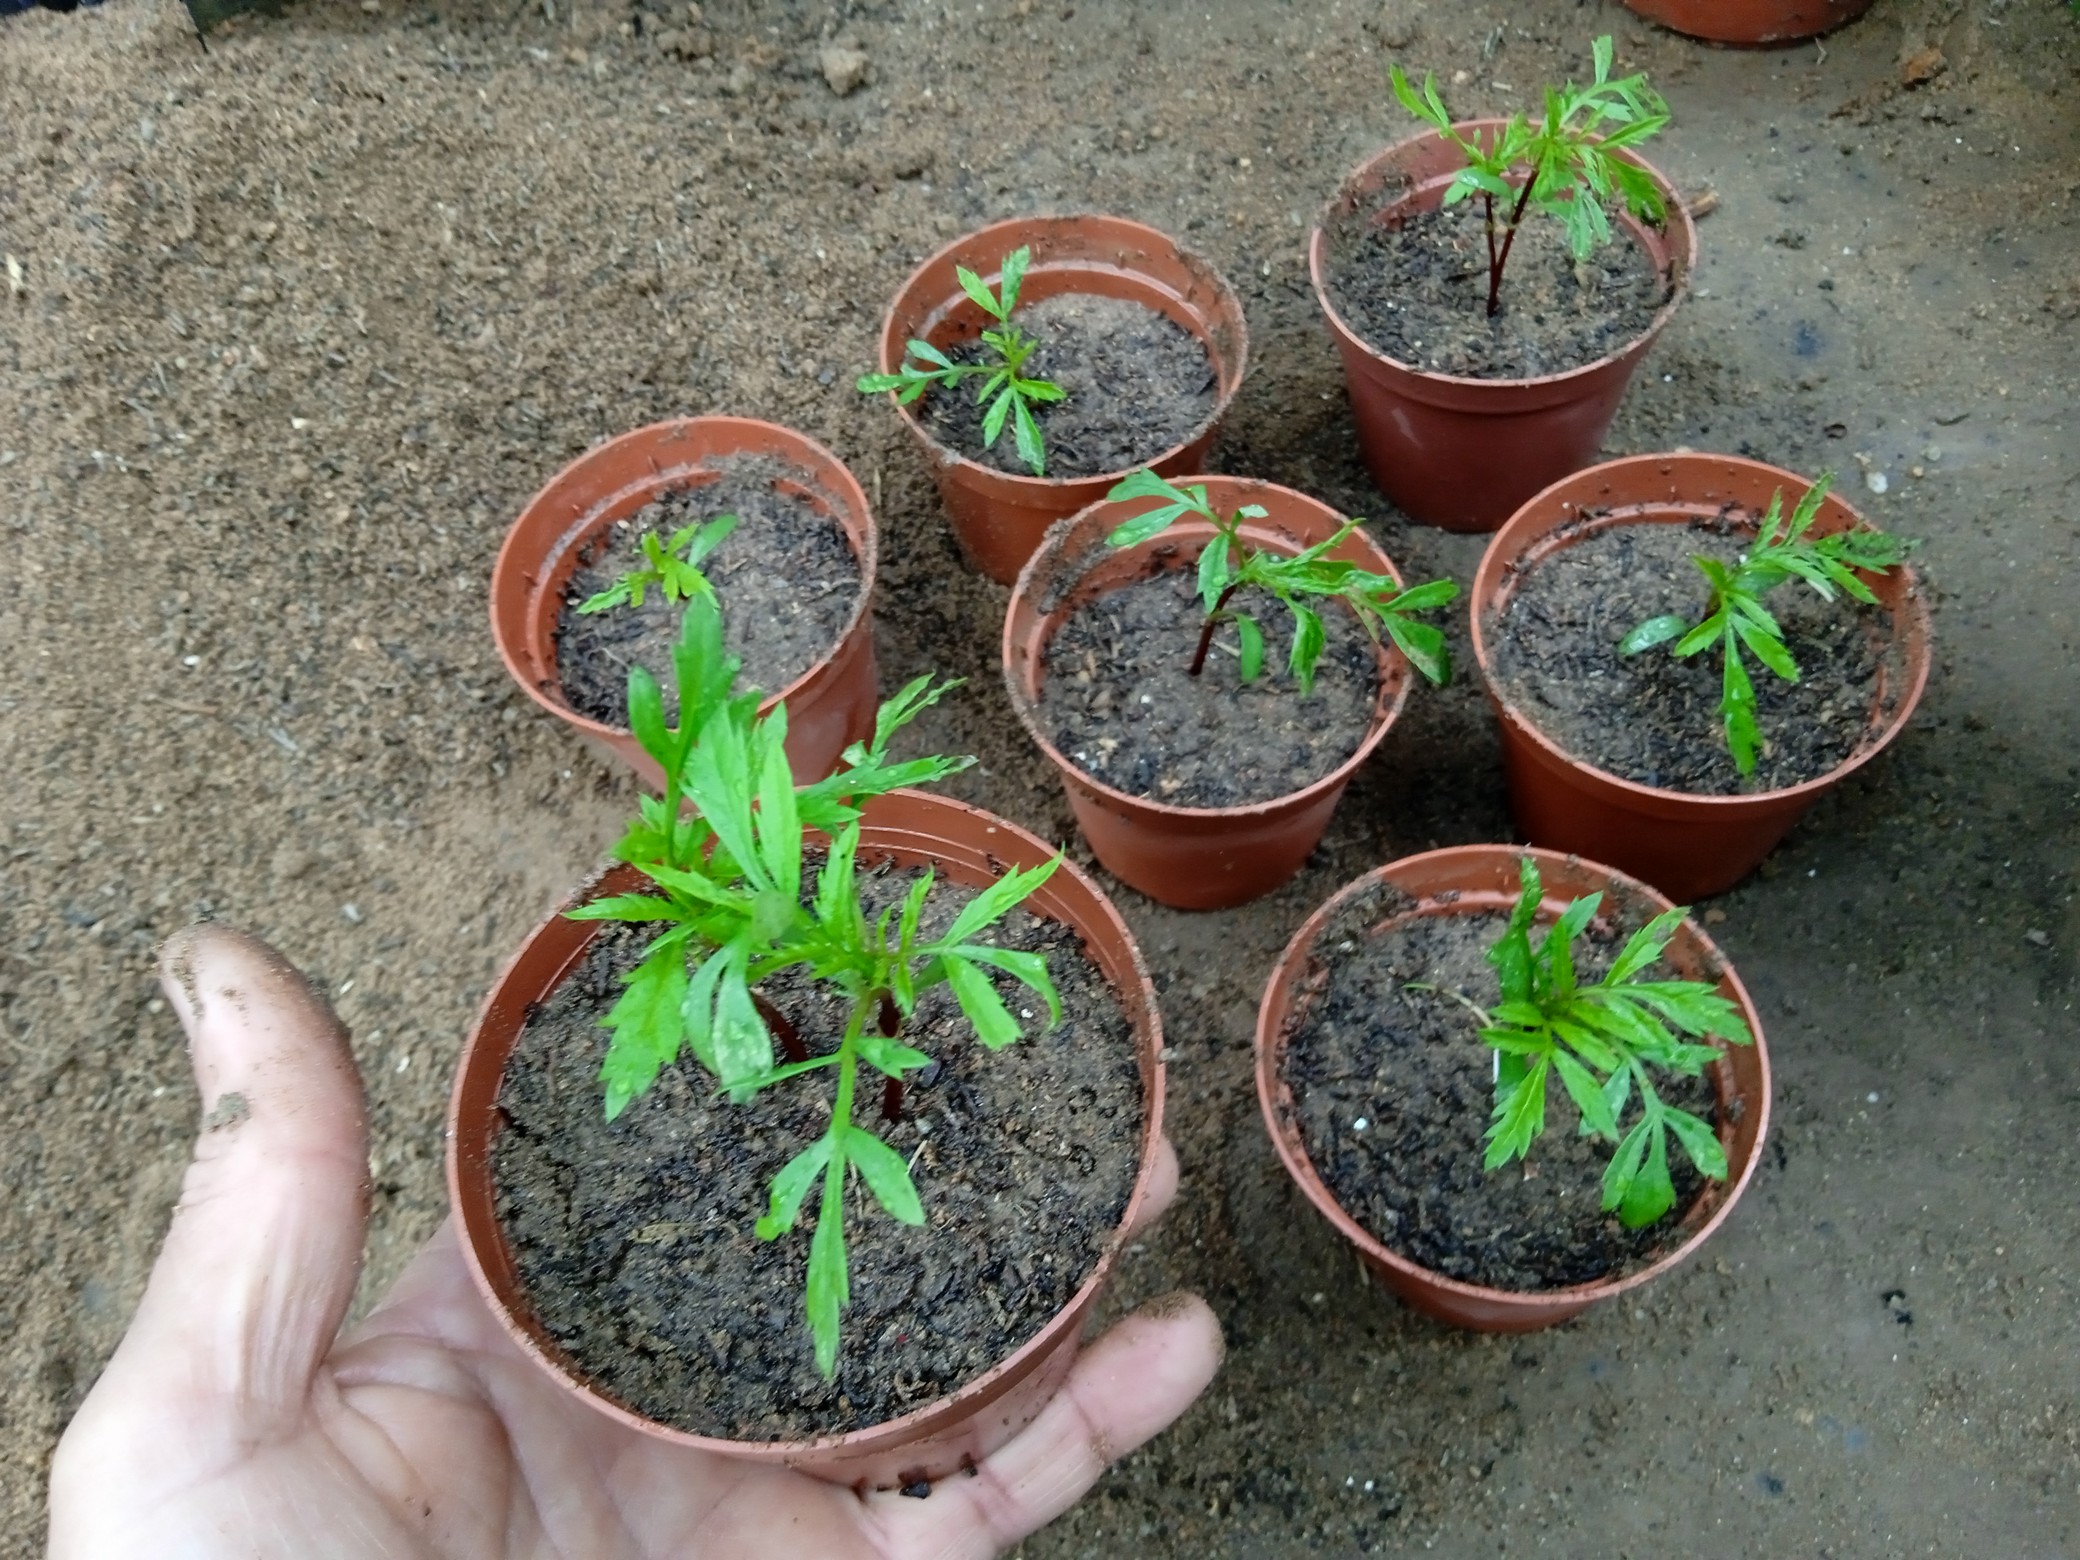 Water seedlings daily with a spray bottle to prevent water logging and alleviate the risk of damping off.